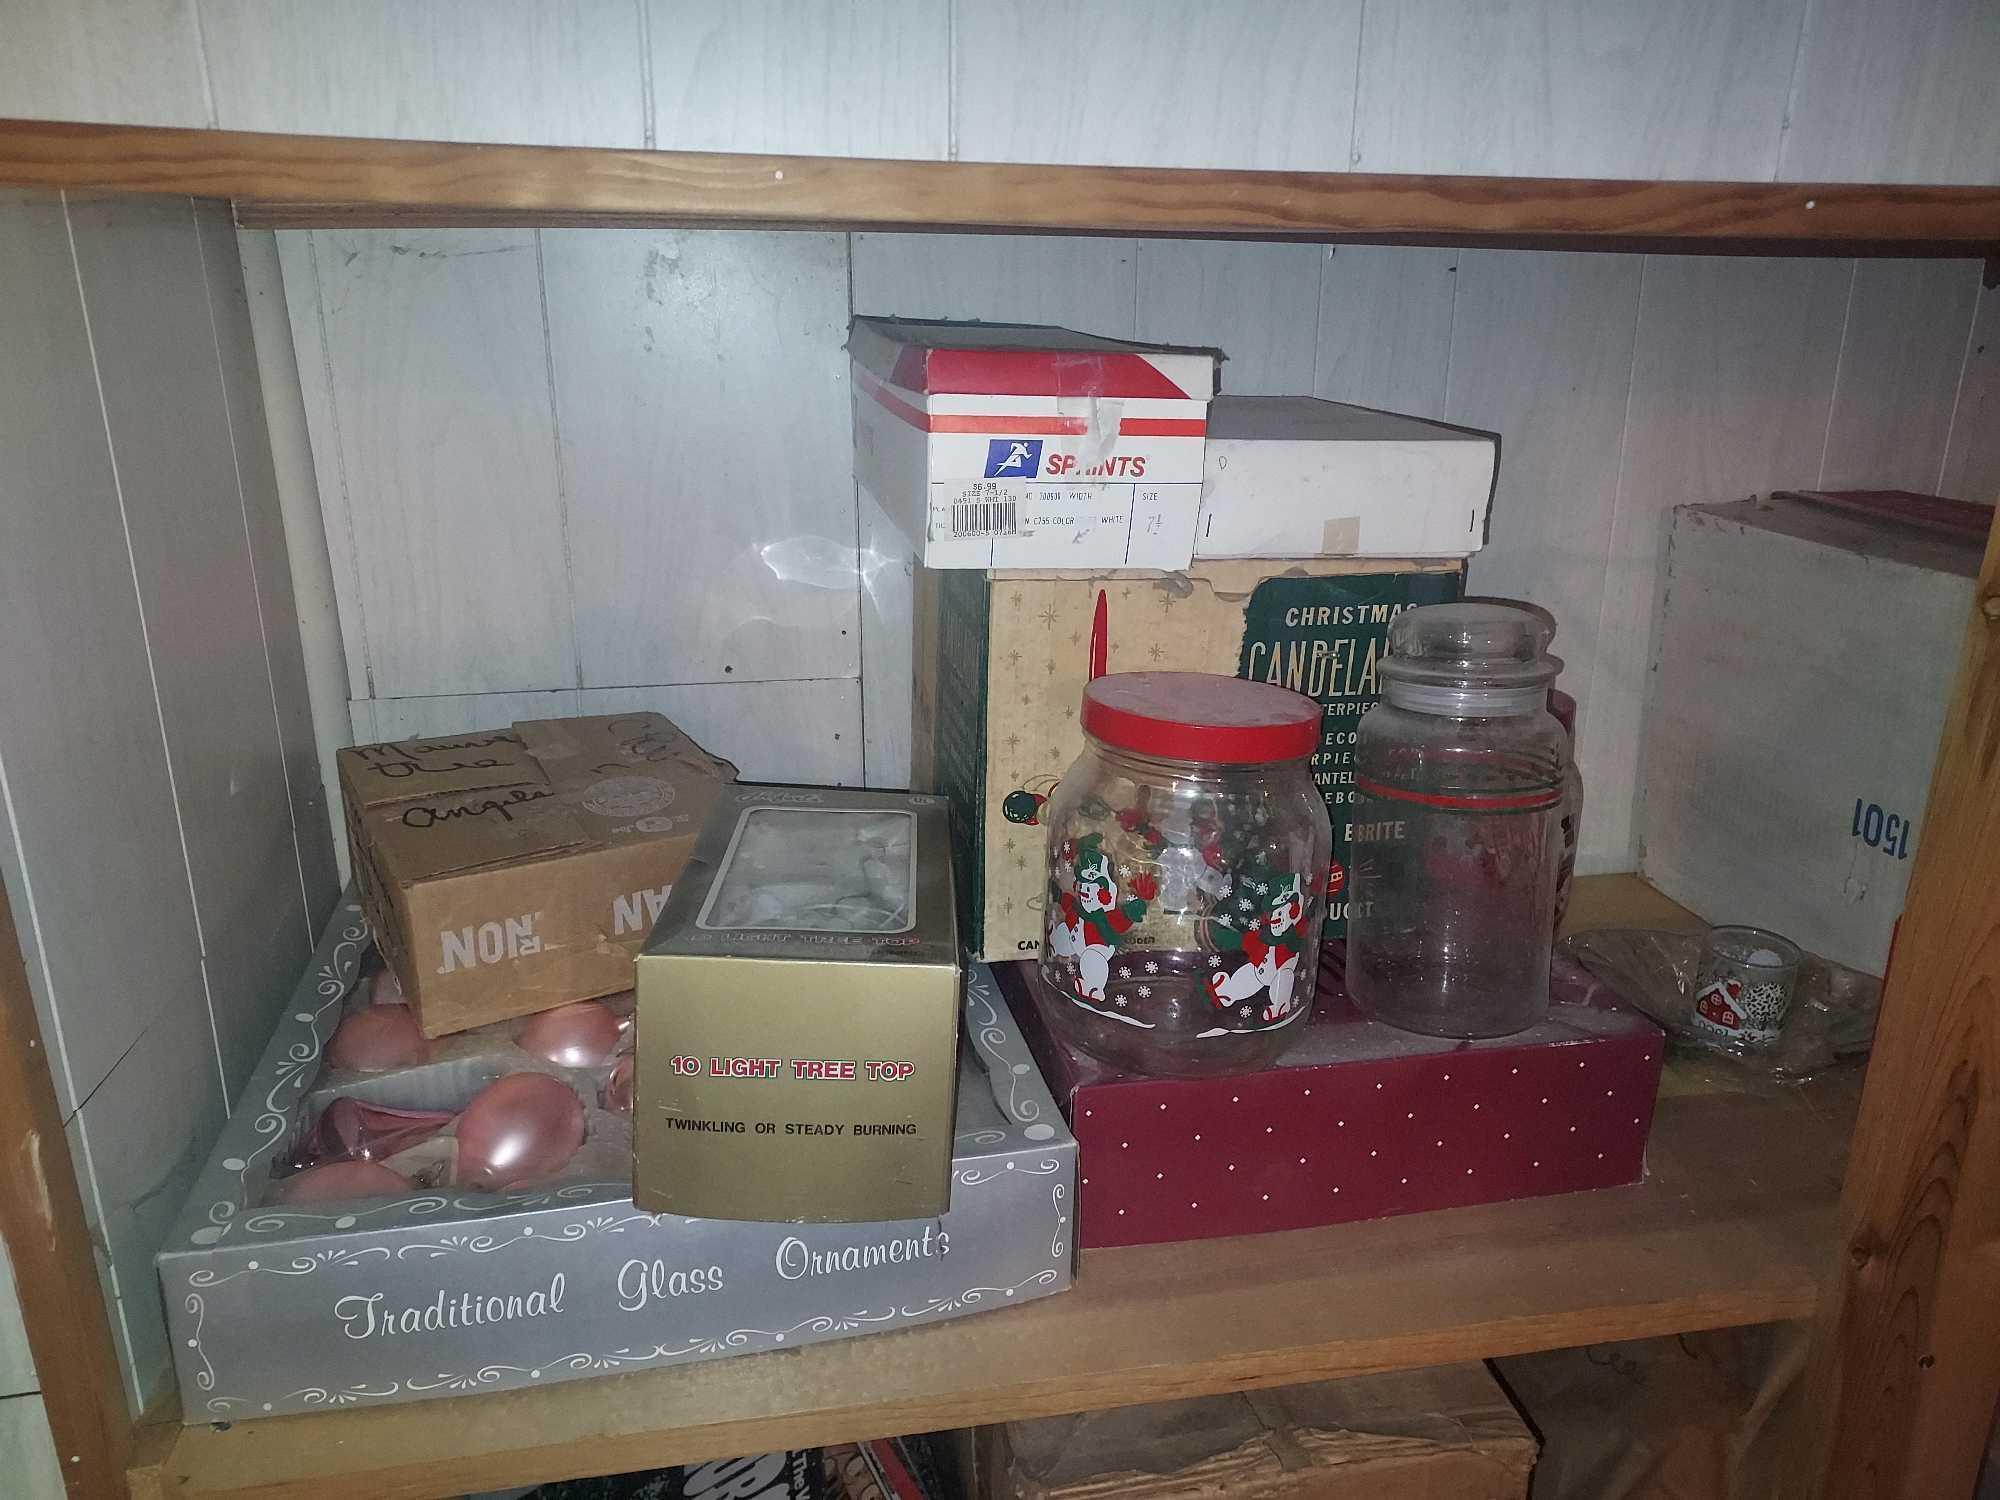 Contents of Basement Shelving - Jars, Decor, Appliances, Ironing Board, Extension Cords, Lights, &